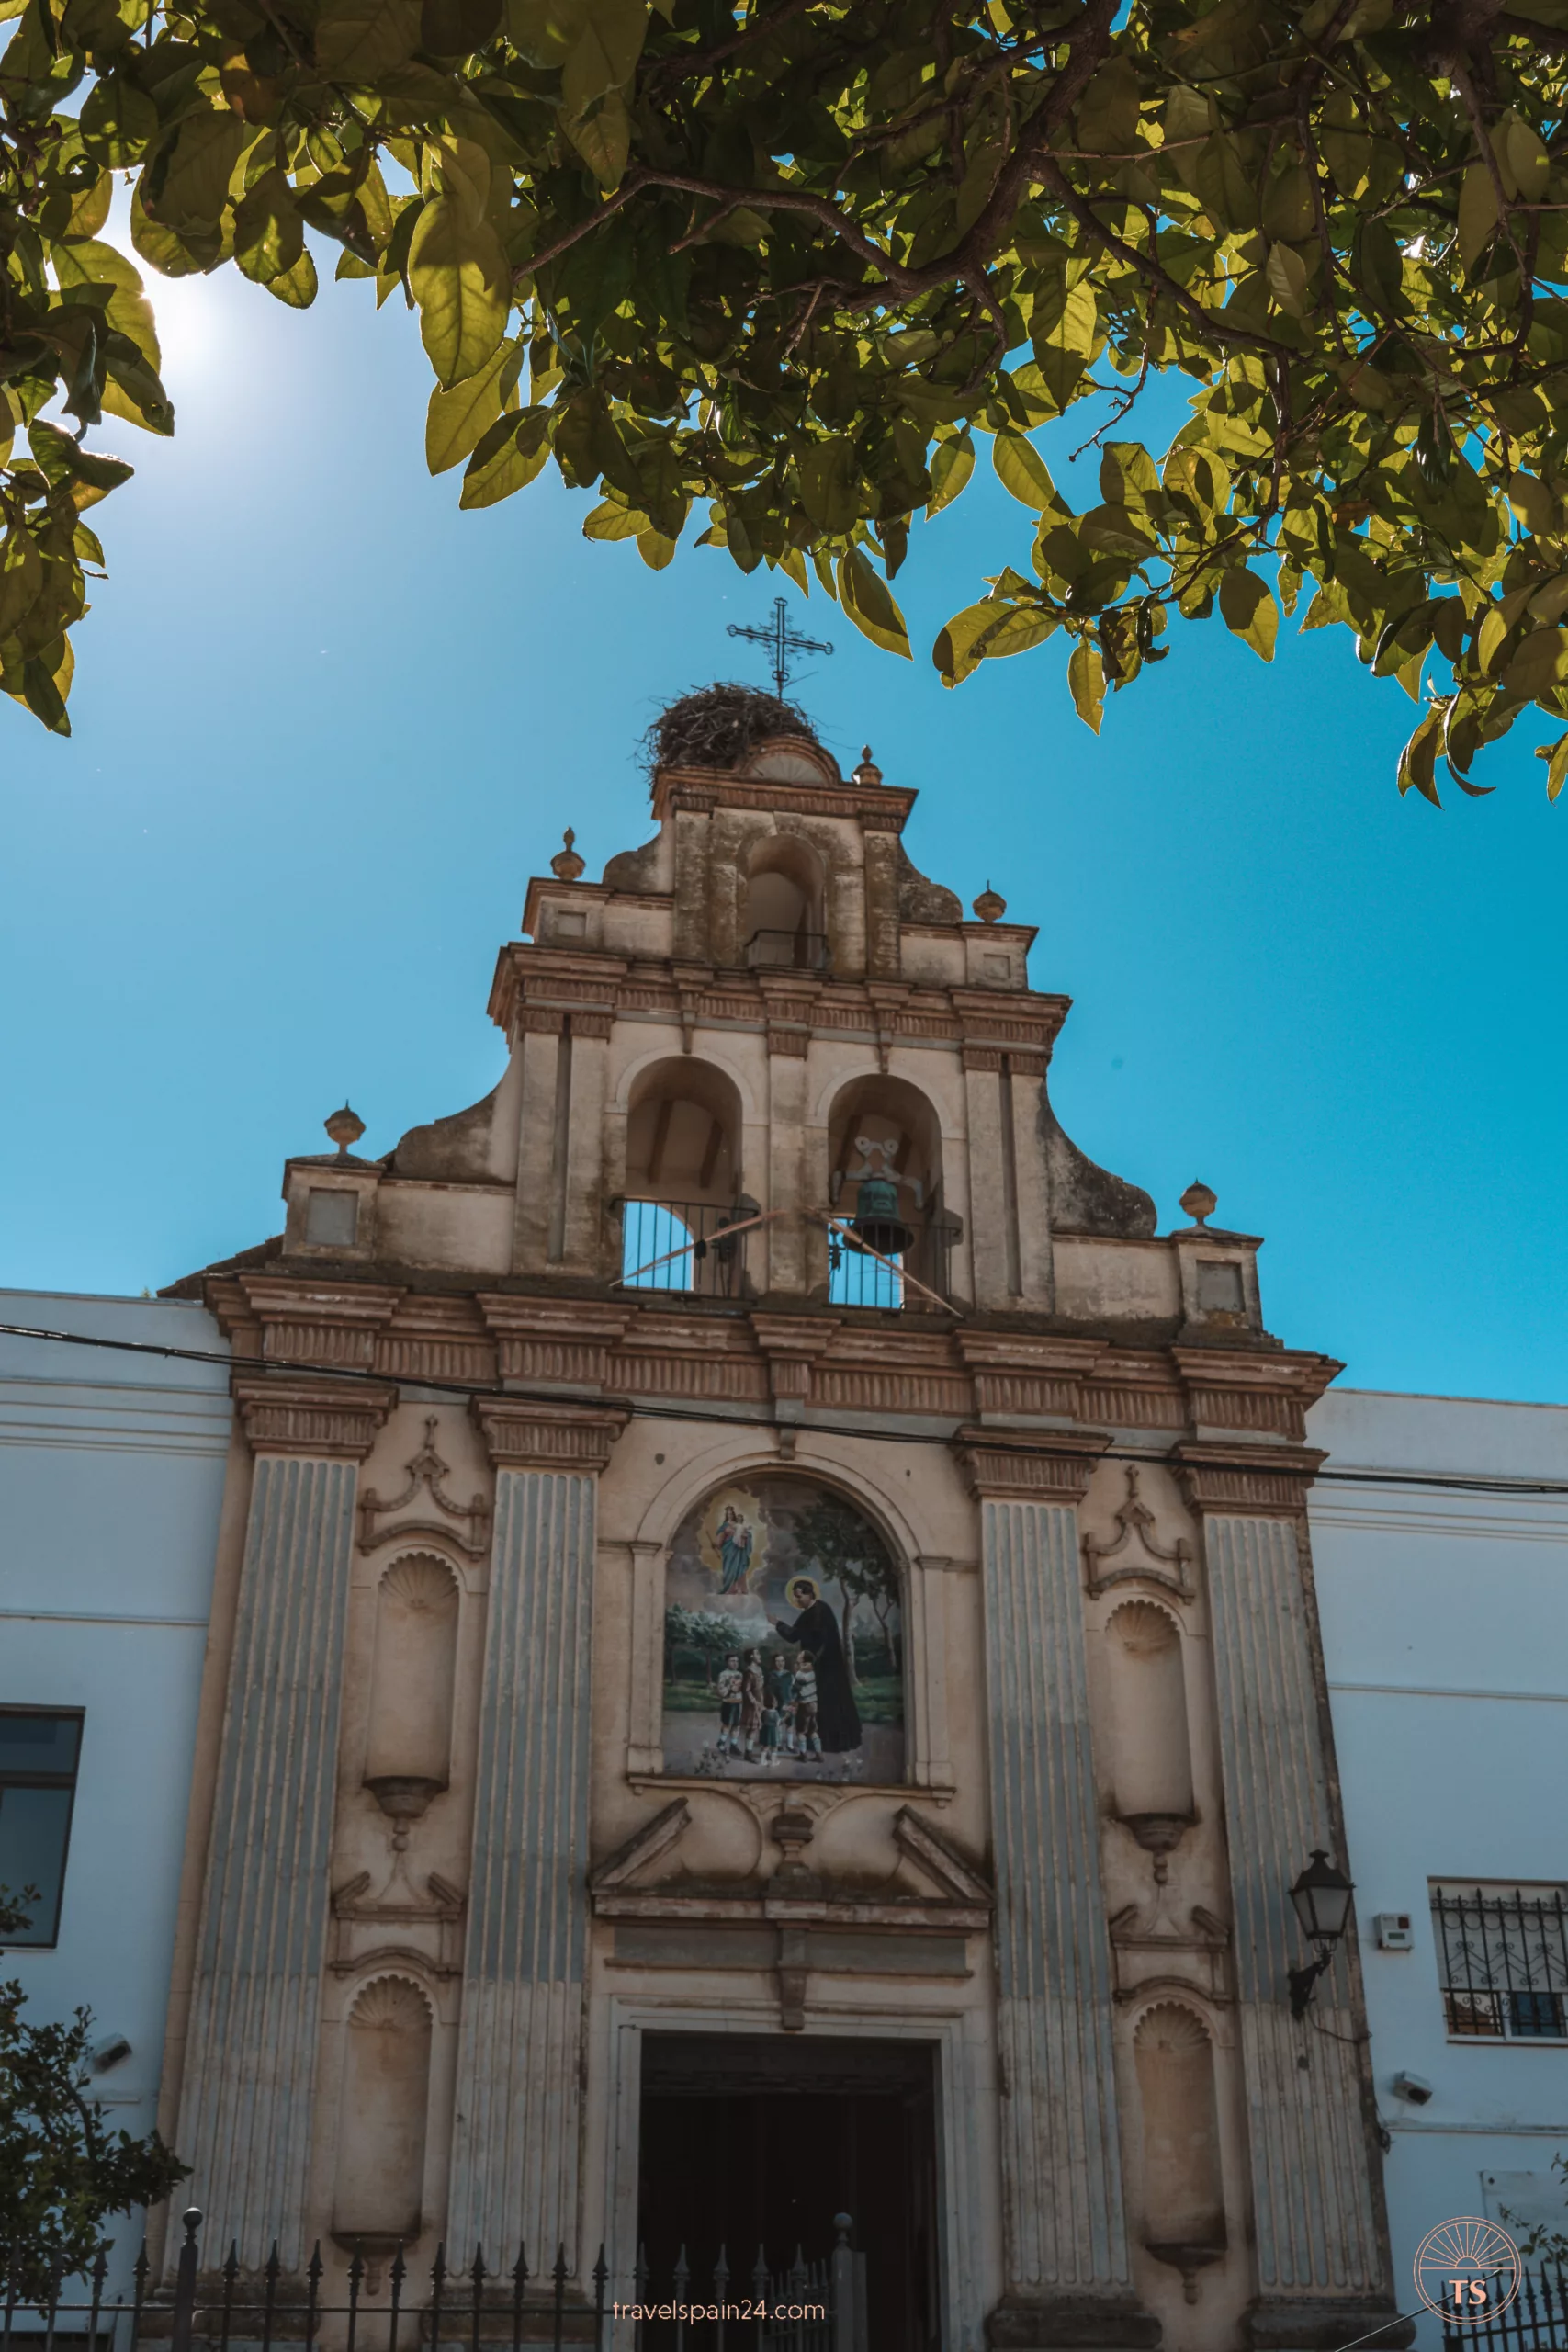 Iglesia de María Auxiliadora in Arcos de la Frontera, taken from under a tree. The tower has a cross and a stork's nest above three bells. An image of Jesus and a pastor watching over children is above the main entrance.